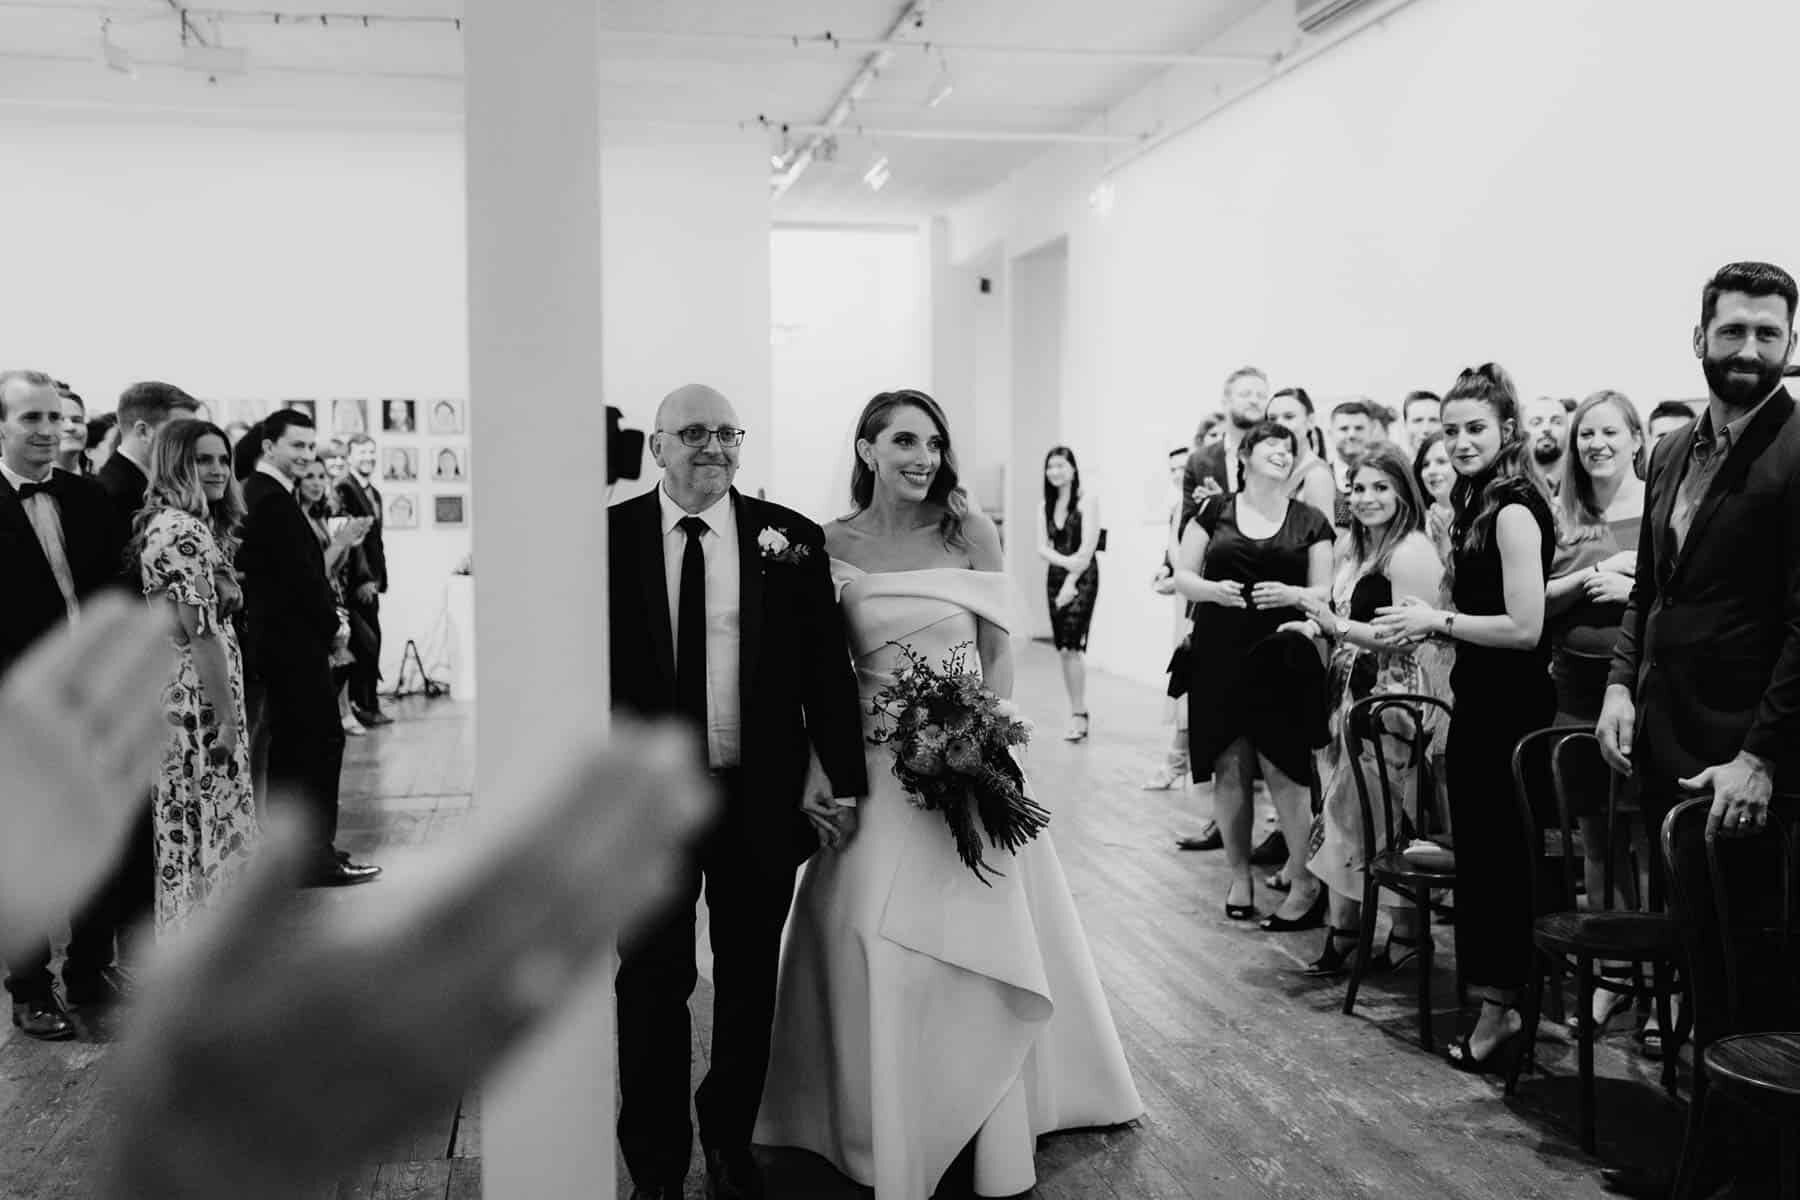 Melbourne gallery wedding at Fortyfive Downstairs / Long Way Home Photography